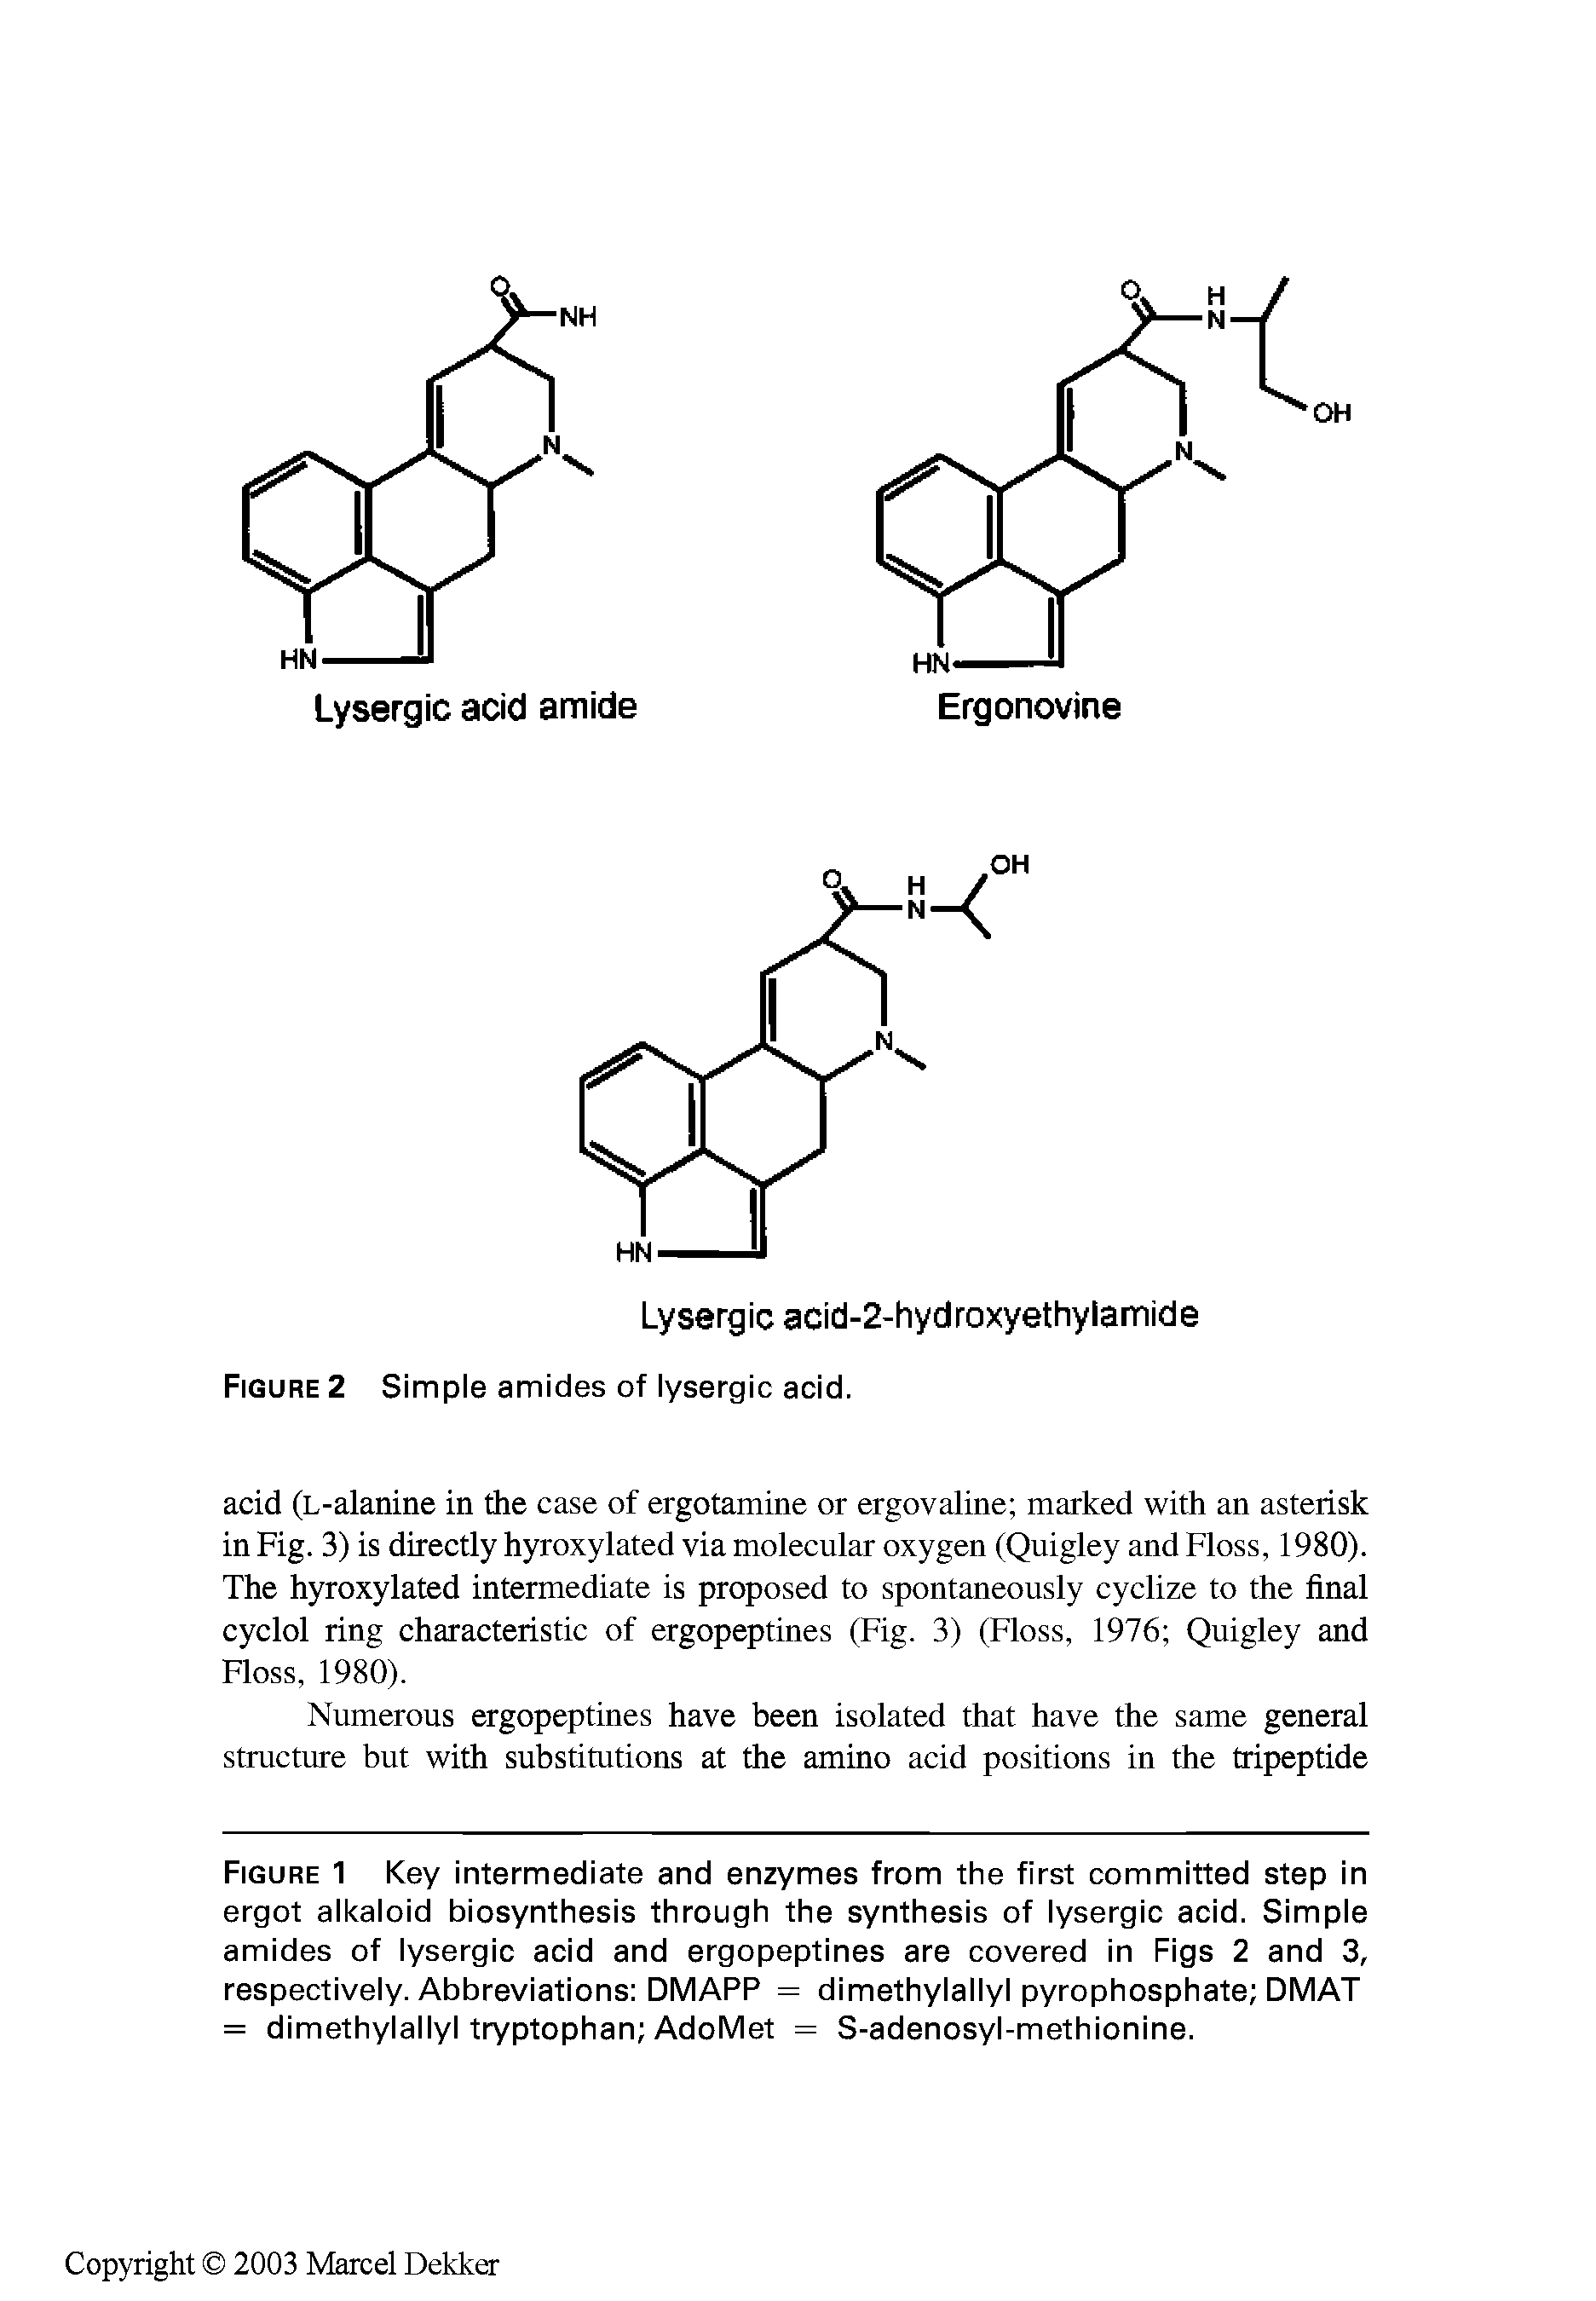 Figure 1 Key intermediate and enzymes from the first committed step in ergot alkaloid biosynthesis through the synthesis of lysergic acid. Simple amides of lysergic acid and ergopeptines are covered in Figs 2 and 3, respectively. Abbreviations DMAPP = dimethylallyl pyrophosphate DMAT = dimethylallyl tryptophan AdoMet = S-adenosyl-methionine.